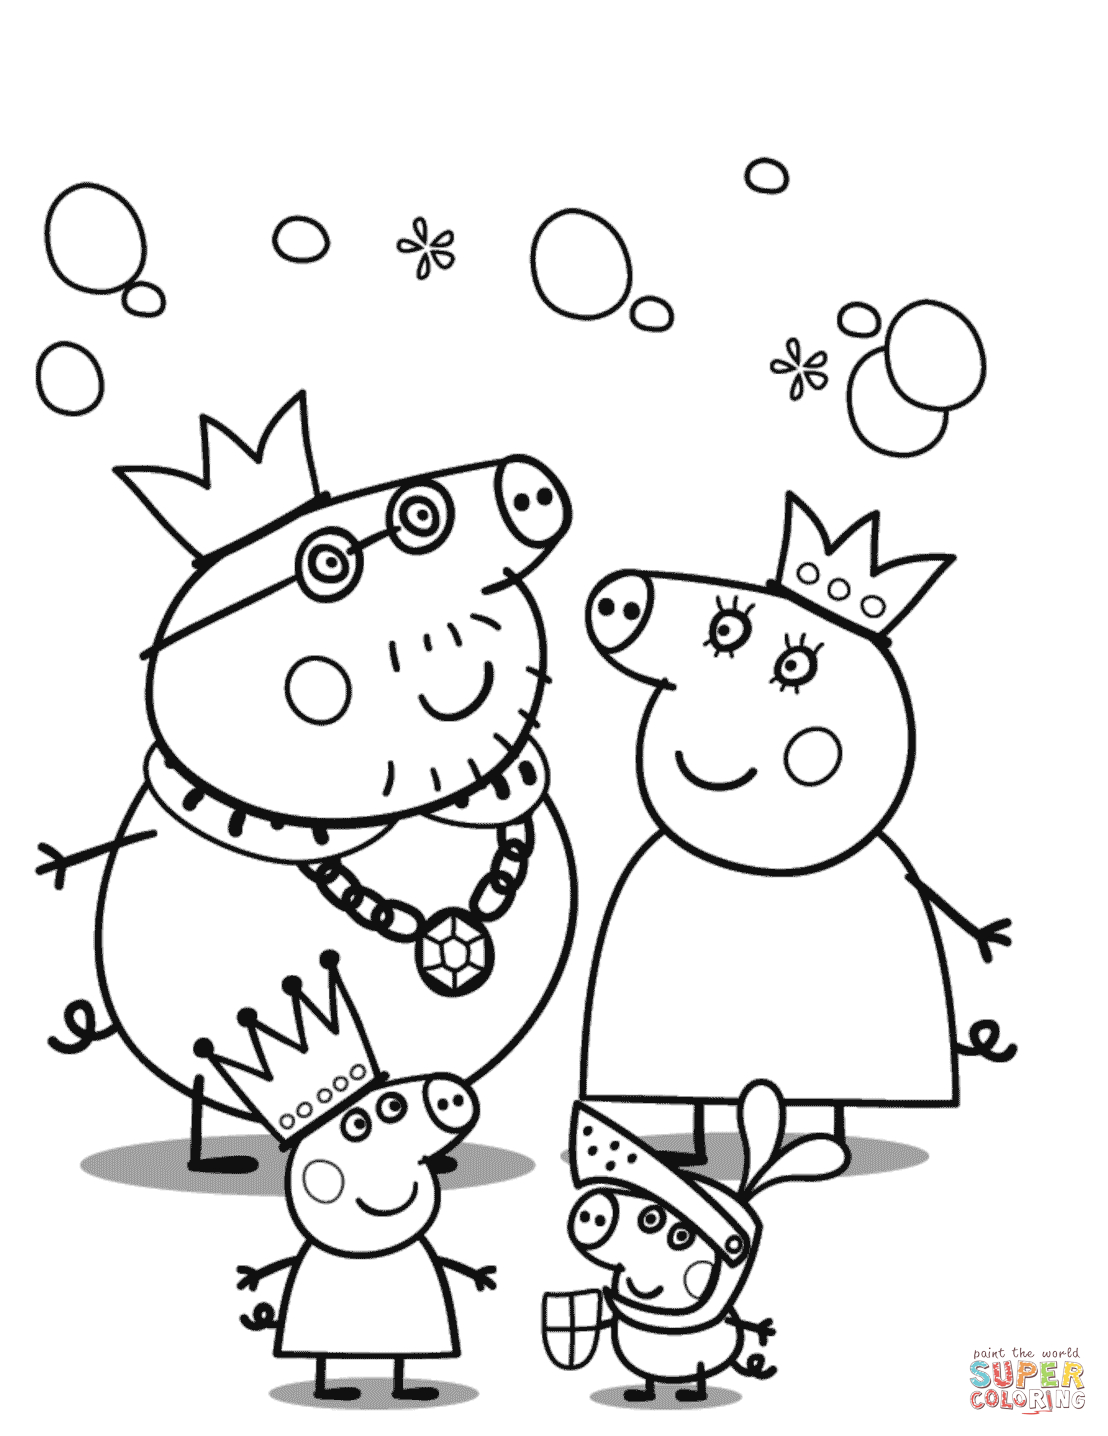 Peppa Pig Coloring Pages | Free Coloring Pages - Pig Coloring Sheets Free Printable